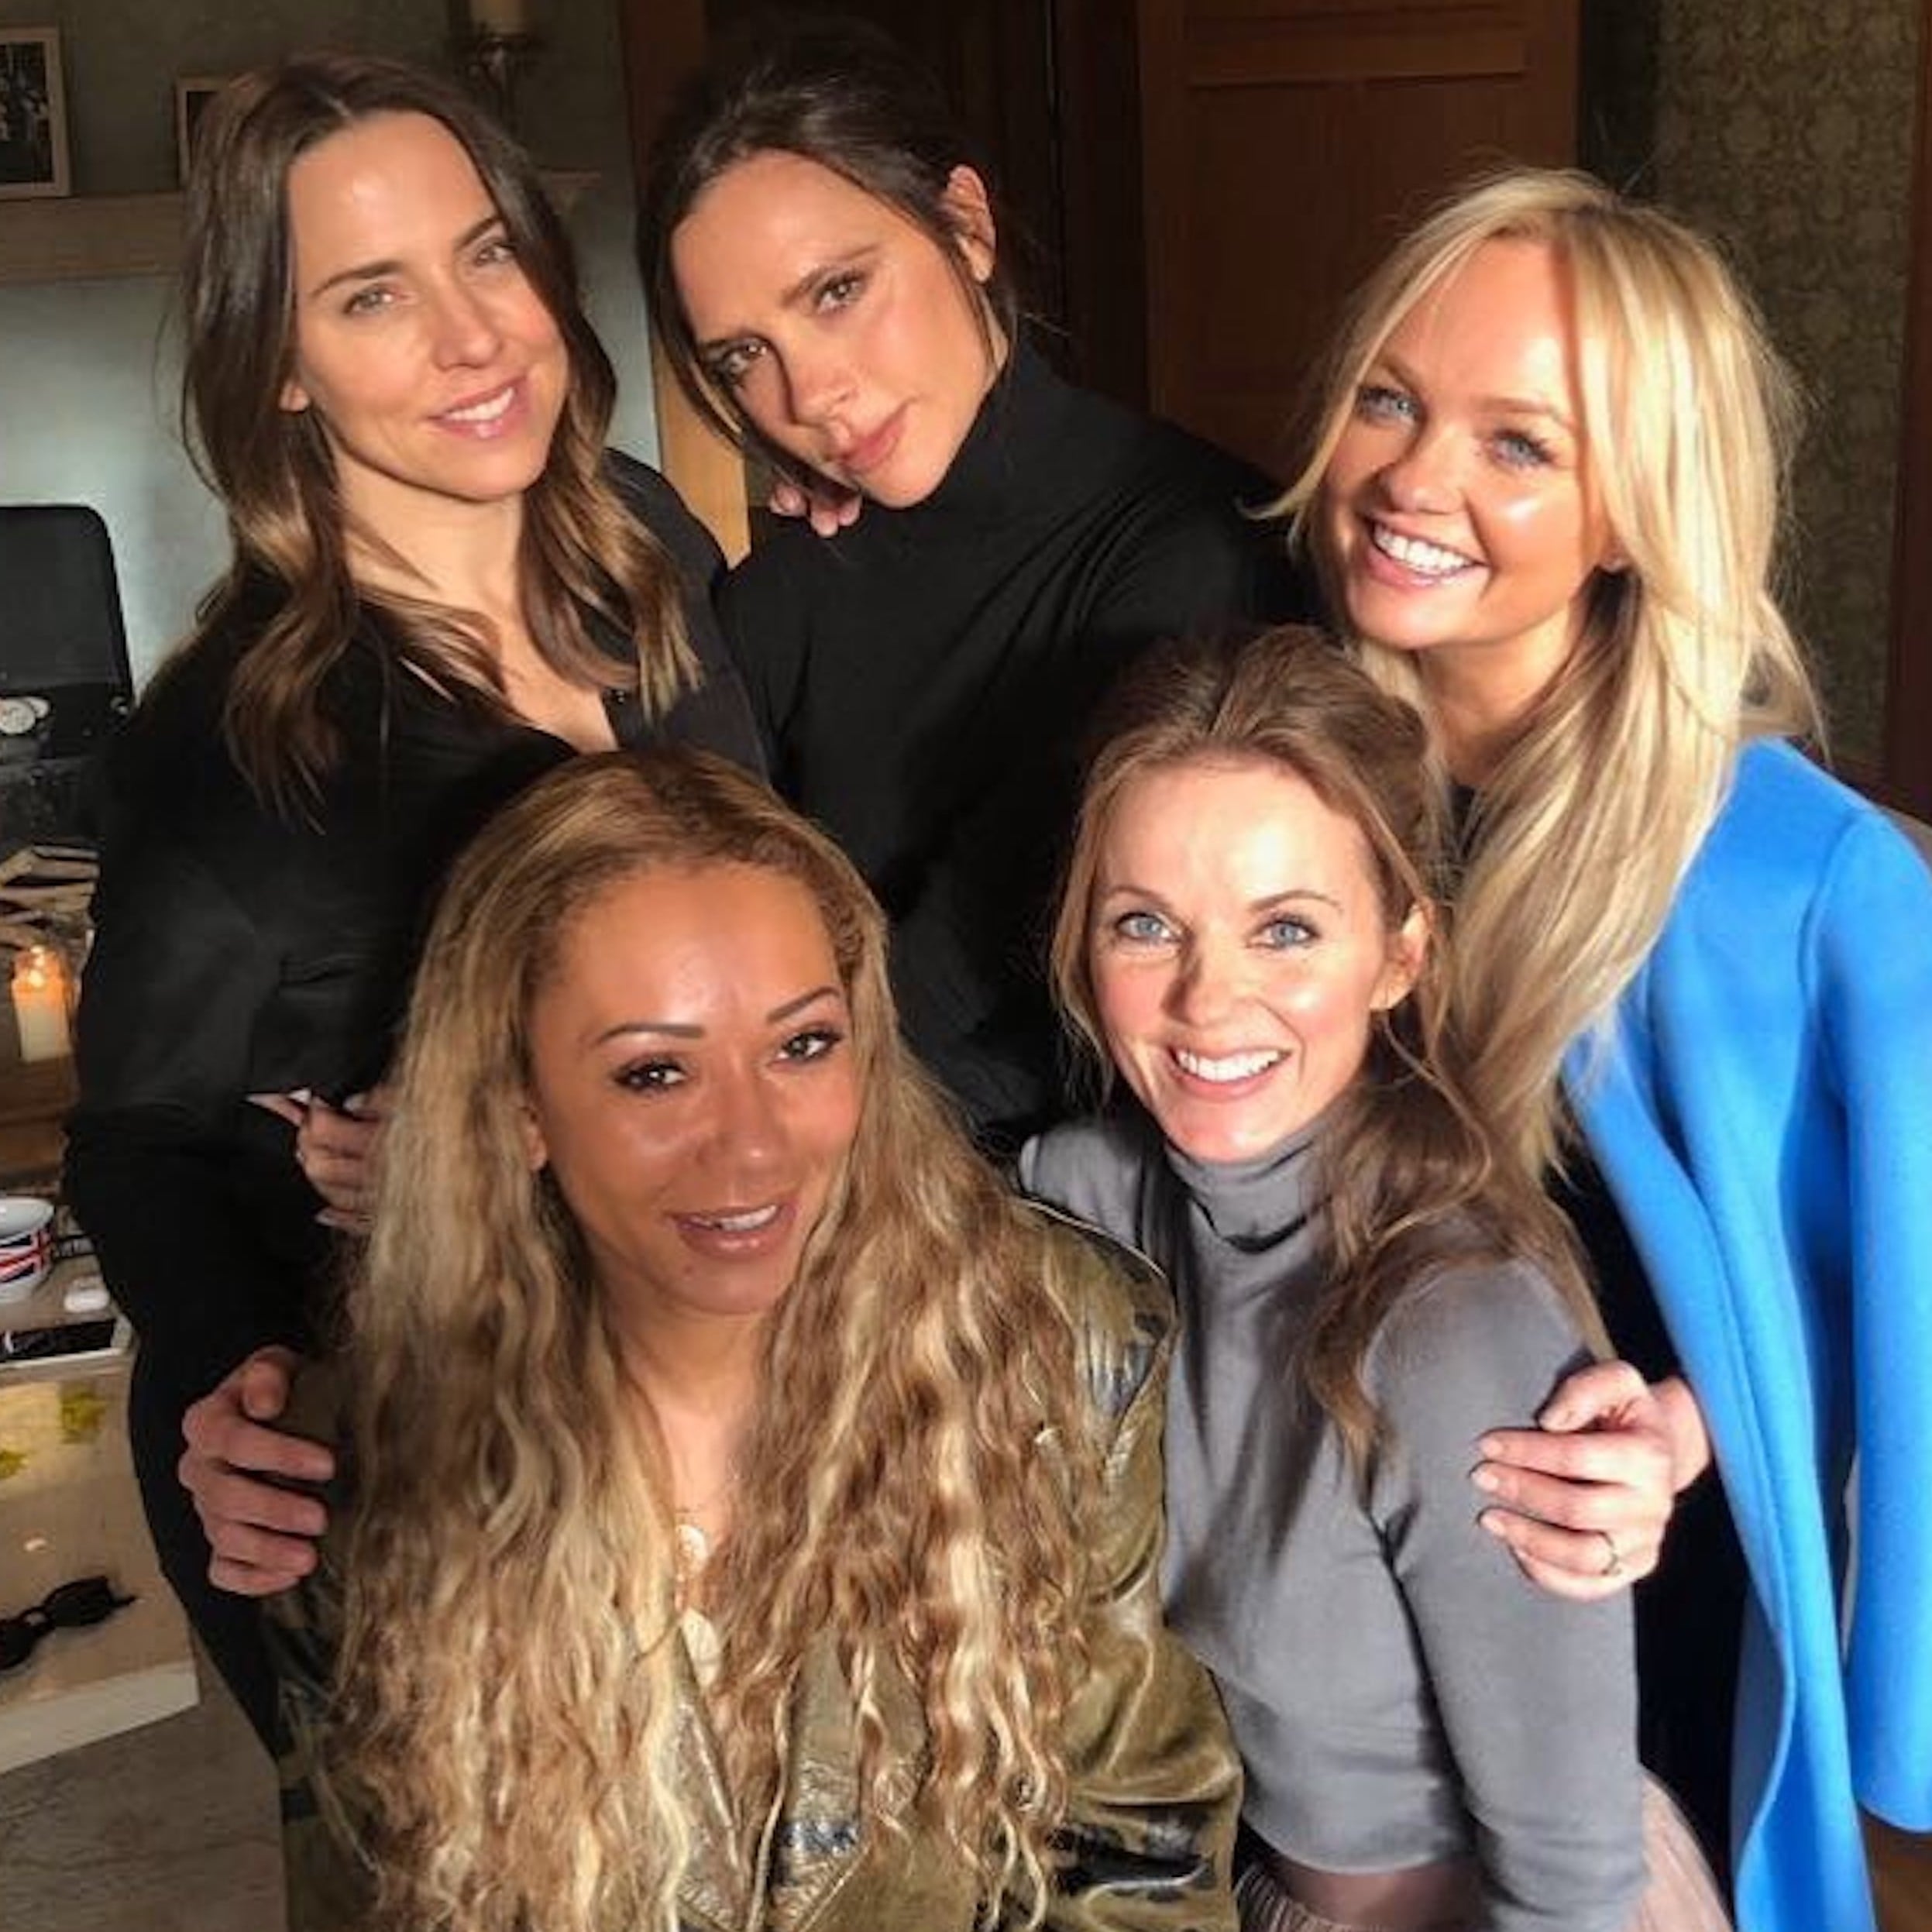 Spice Girls: 22 Spice Girls Facts